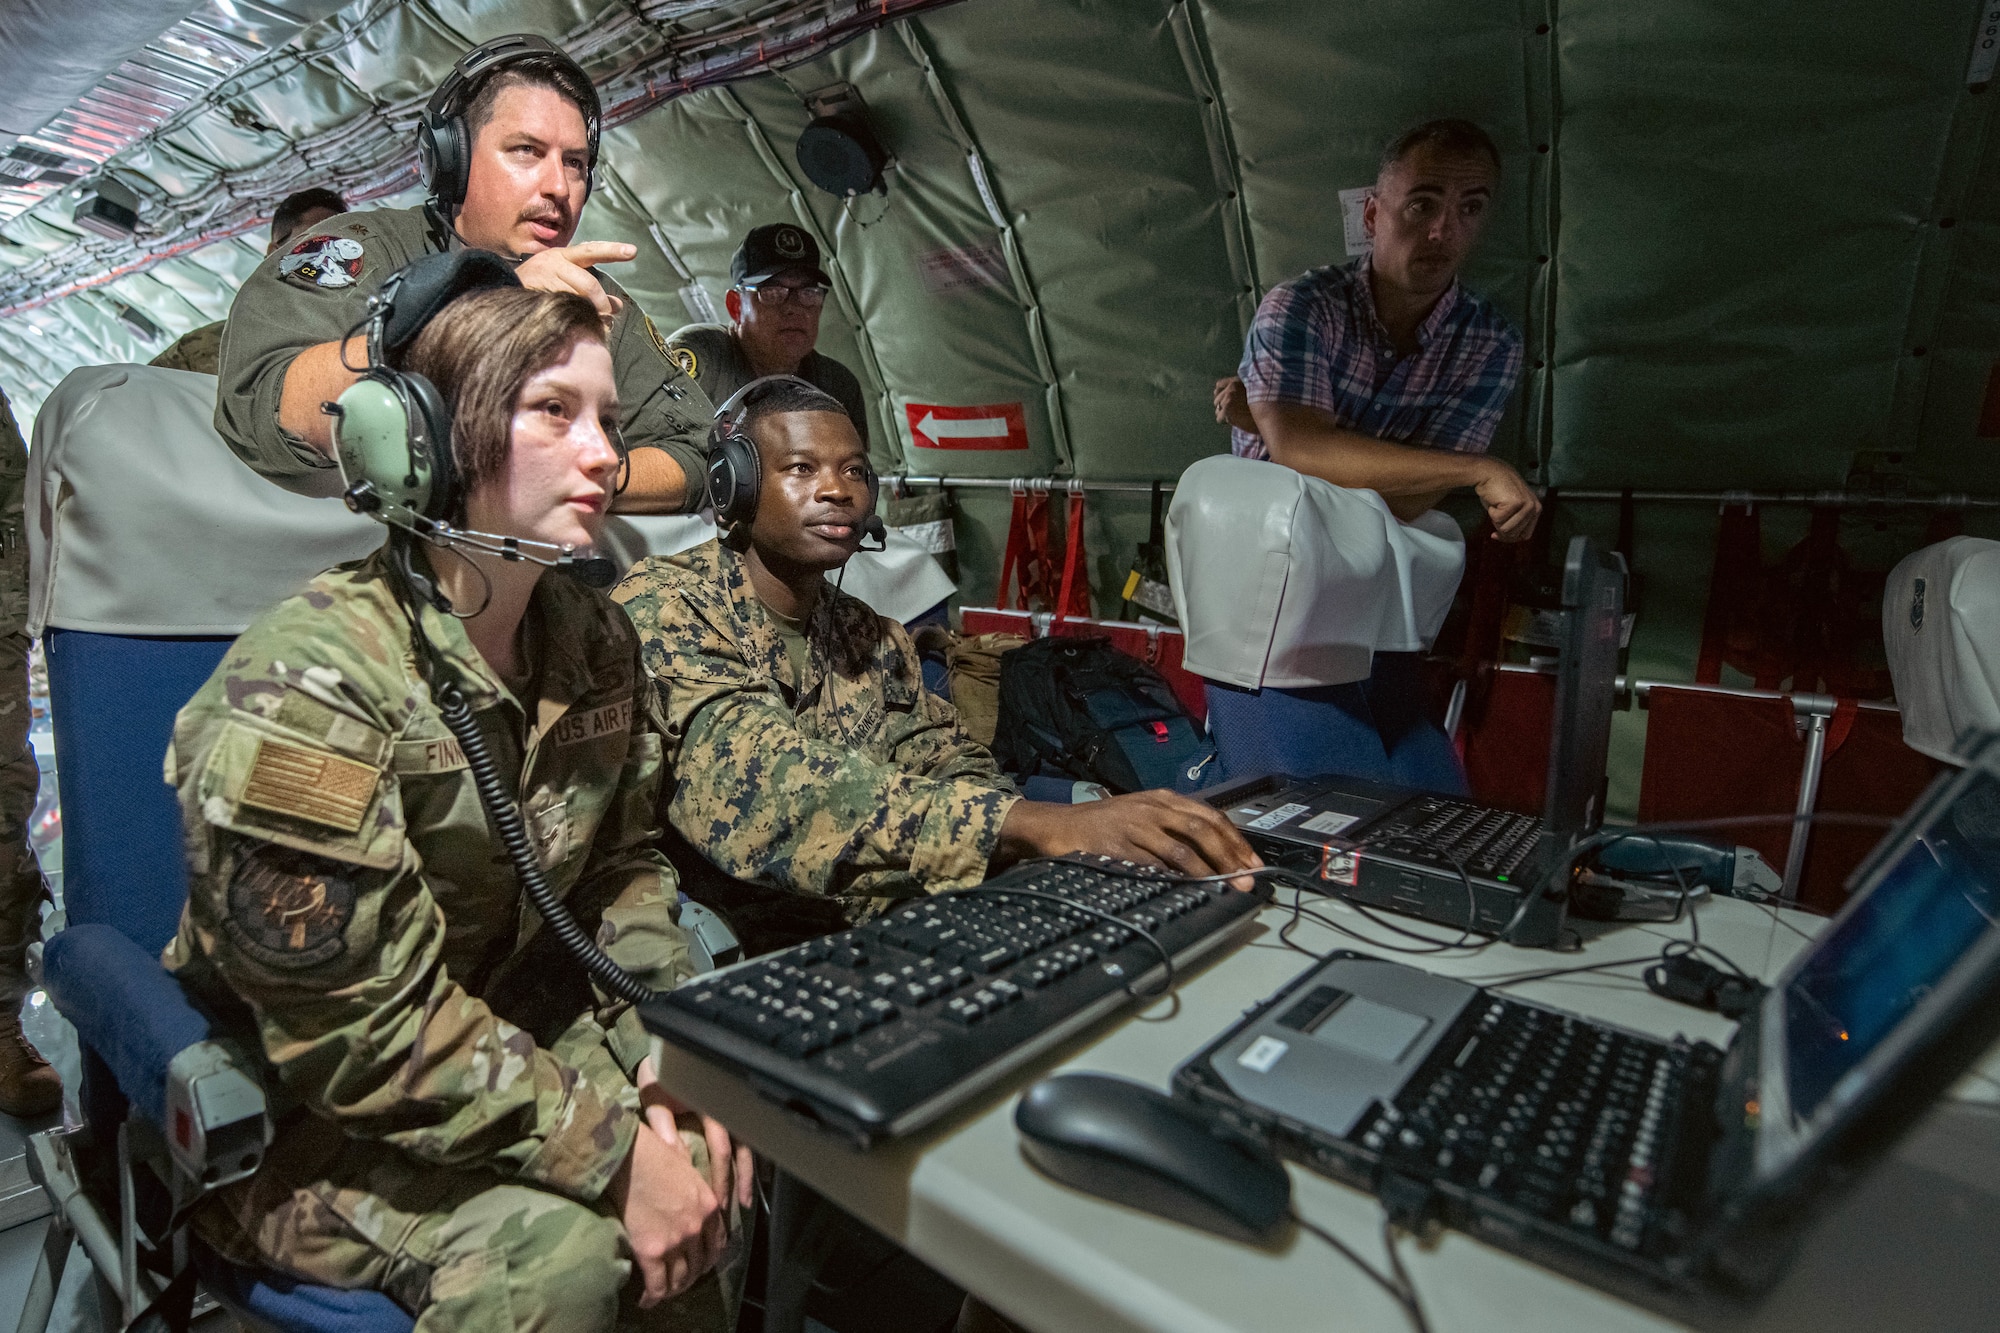 U.S. service members check satellite connections.